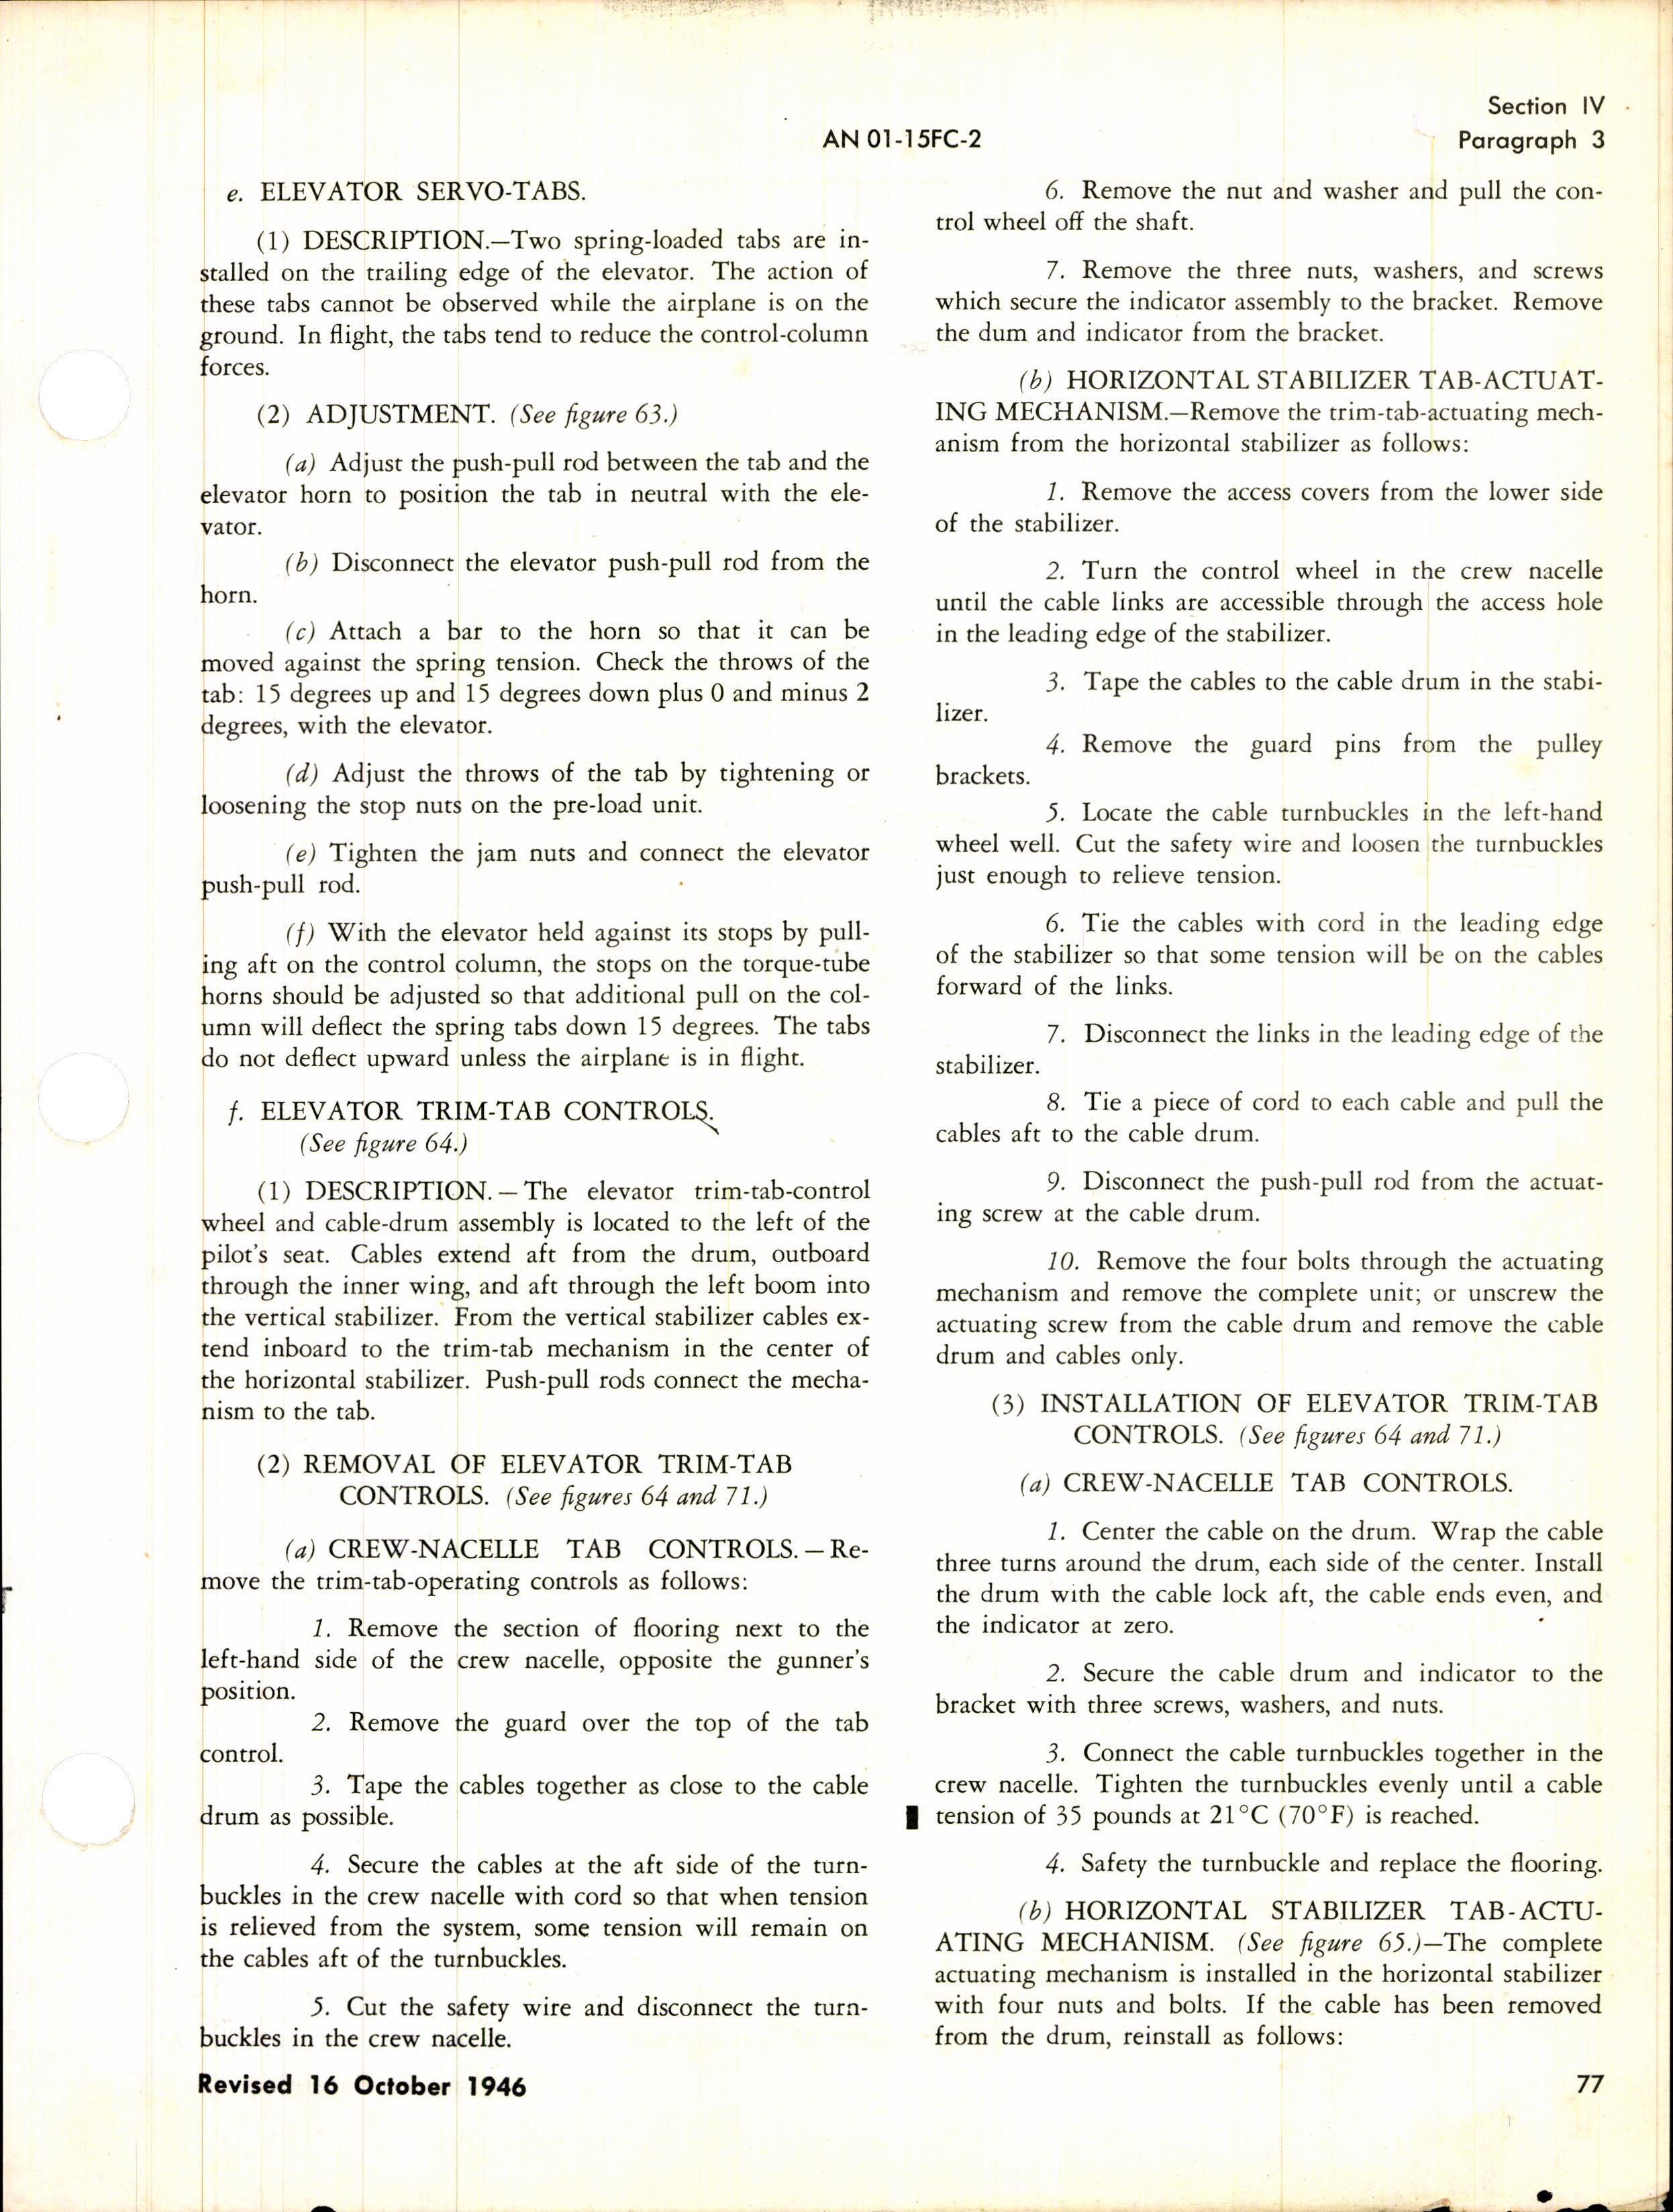 Sample page 3 from AirCorps Library document: Erection and Maintenance Instructions for P-61C Airplanes